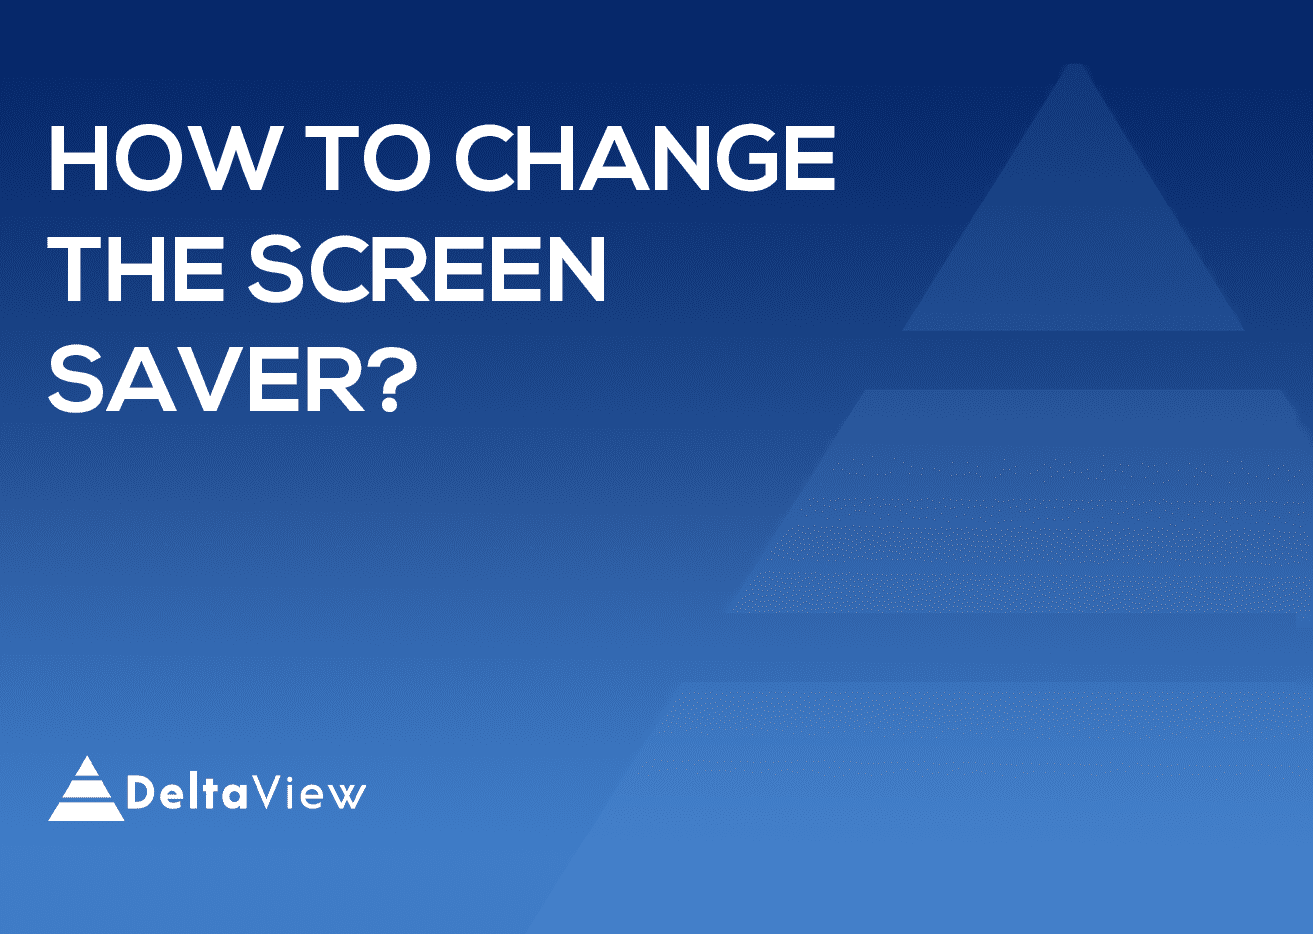 How to change the Screen Saver?